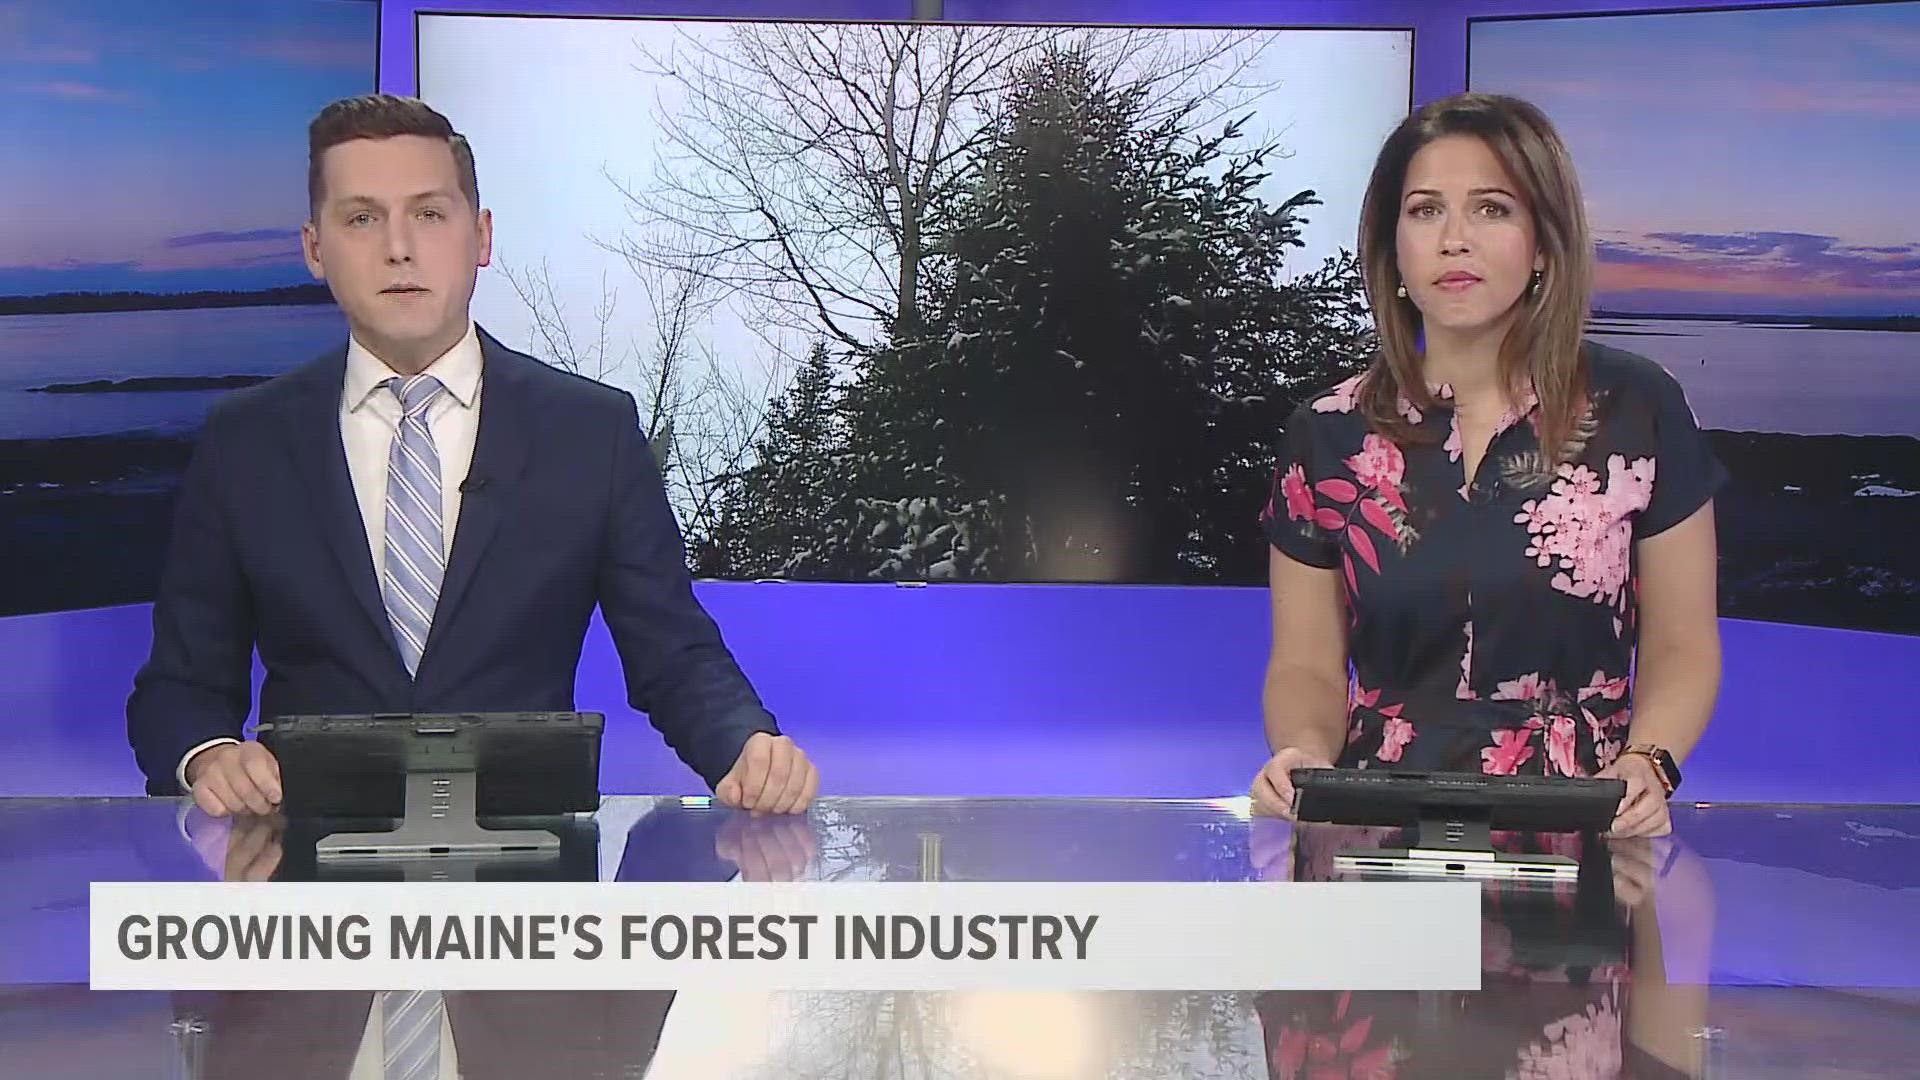 The project chosen focuses on growing the forest bio-economy to help make Maine the leader of bio-based materials.